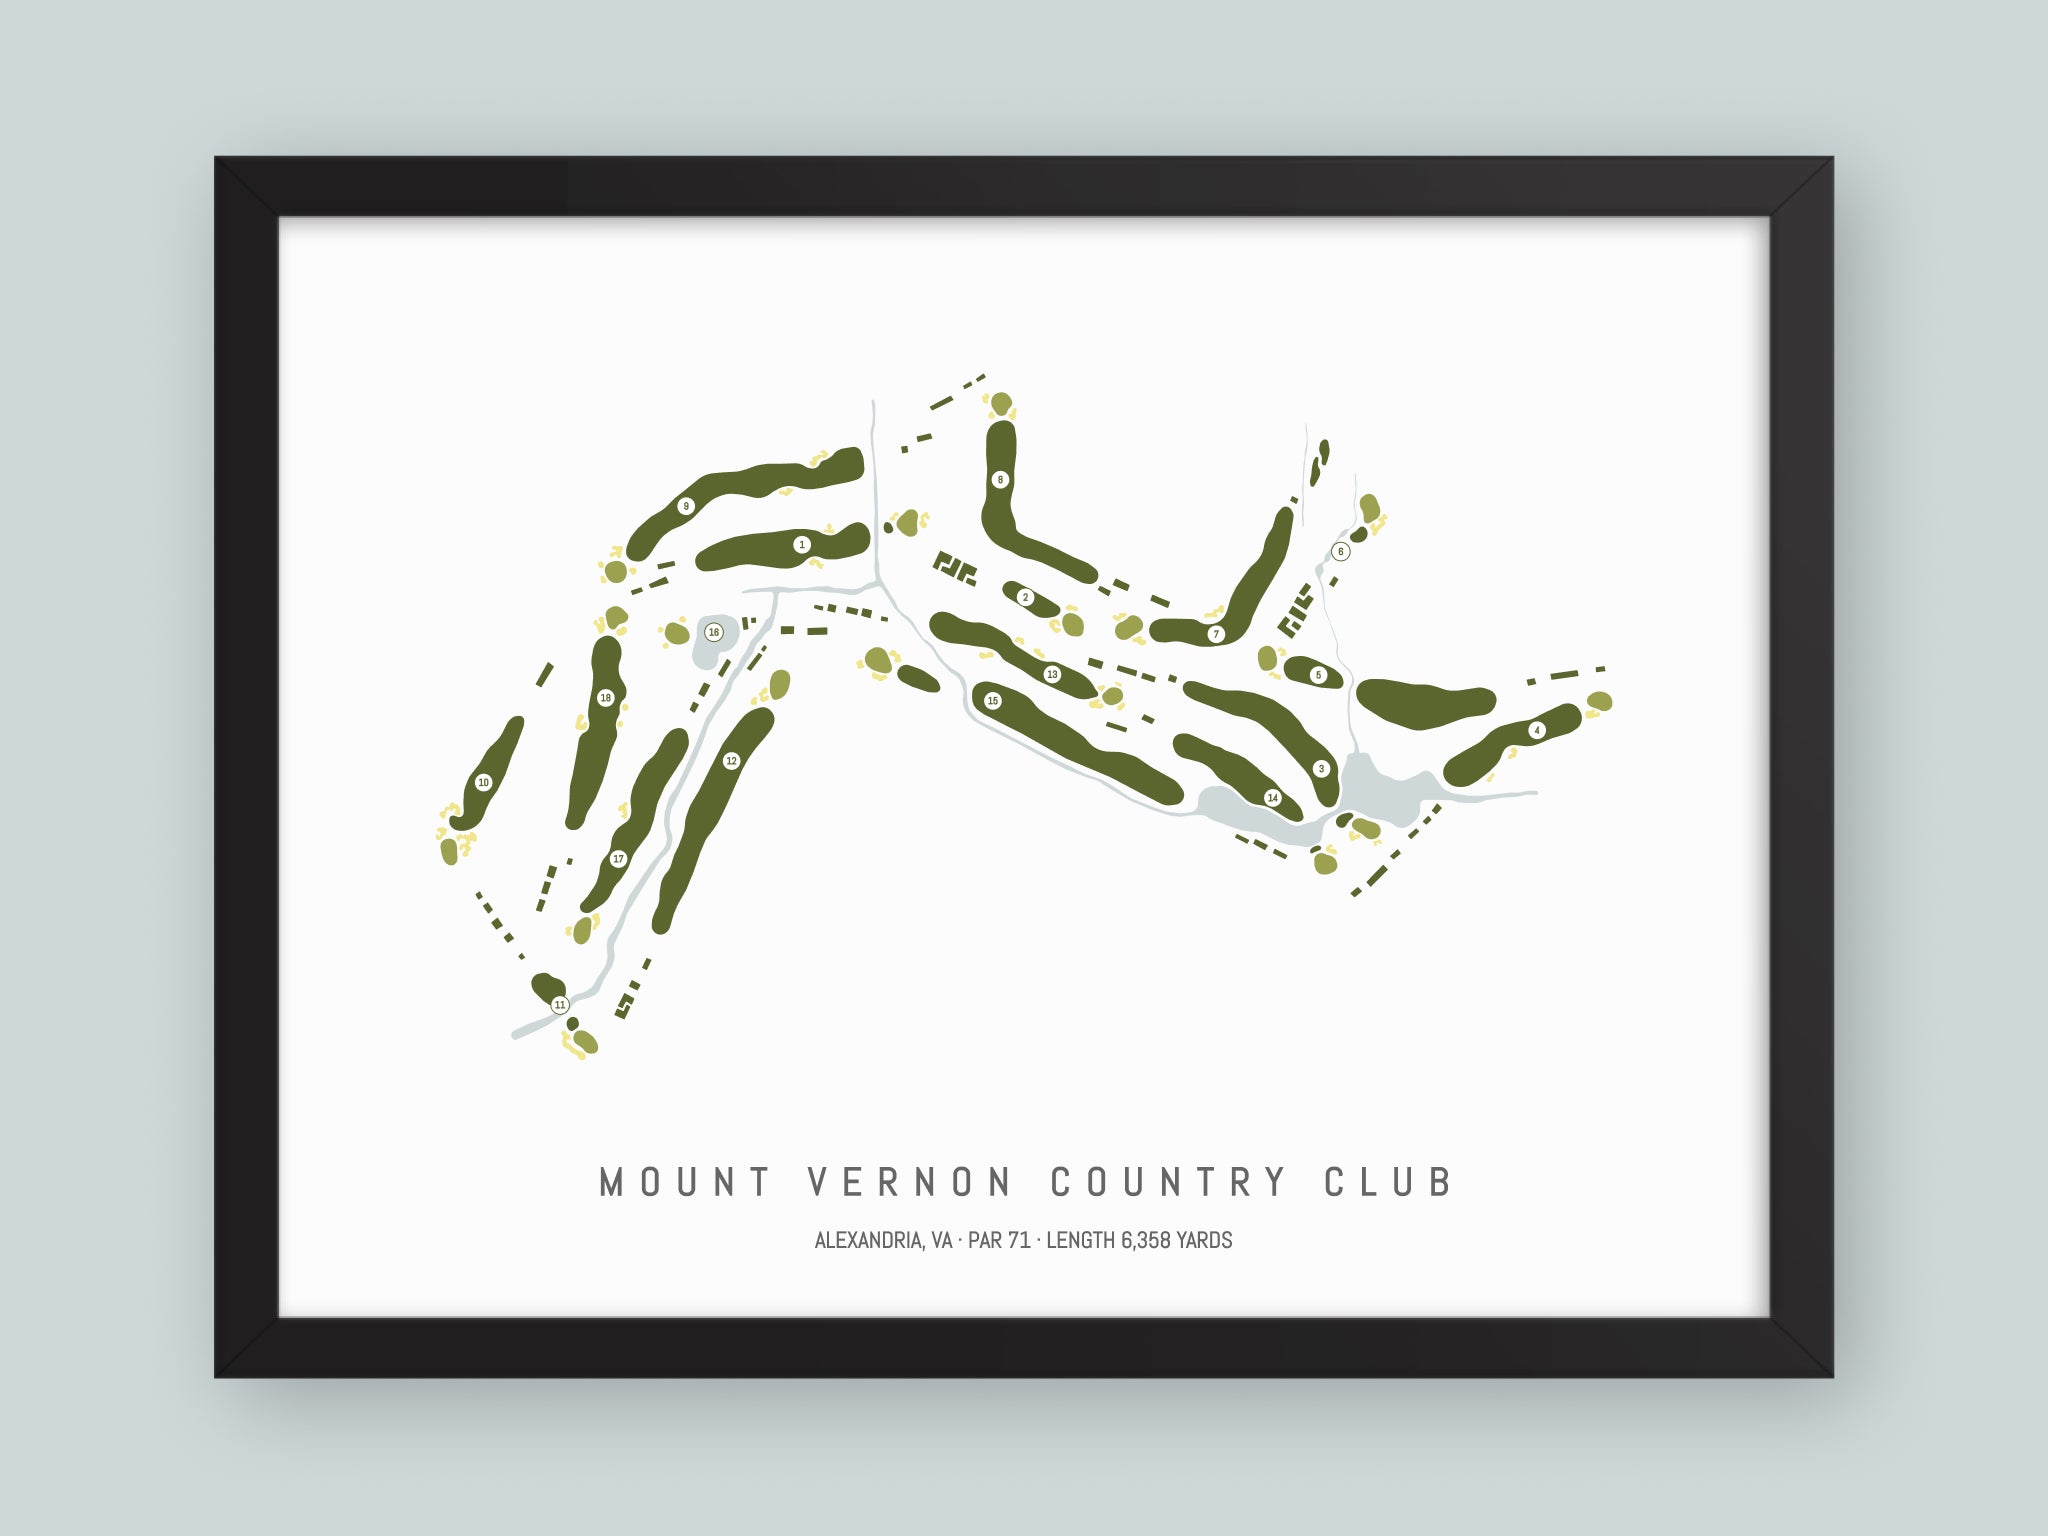 Mount-Vernon-Country-Club-VA--Black-Frame-24x18-With-Hole-Numbers